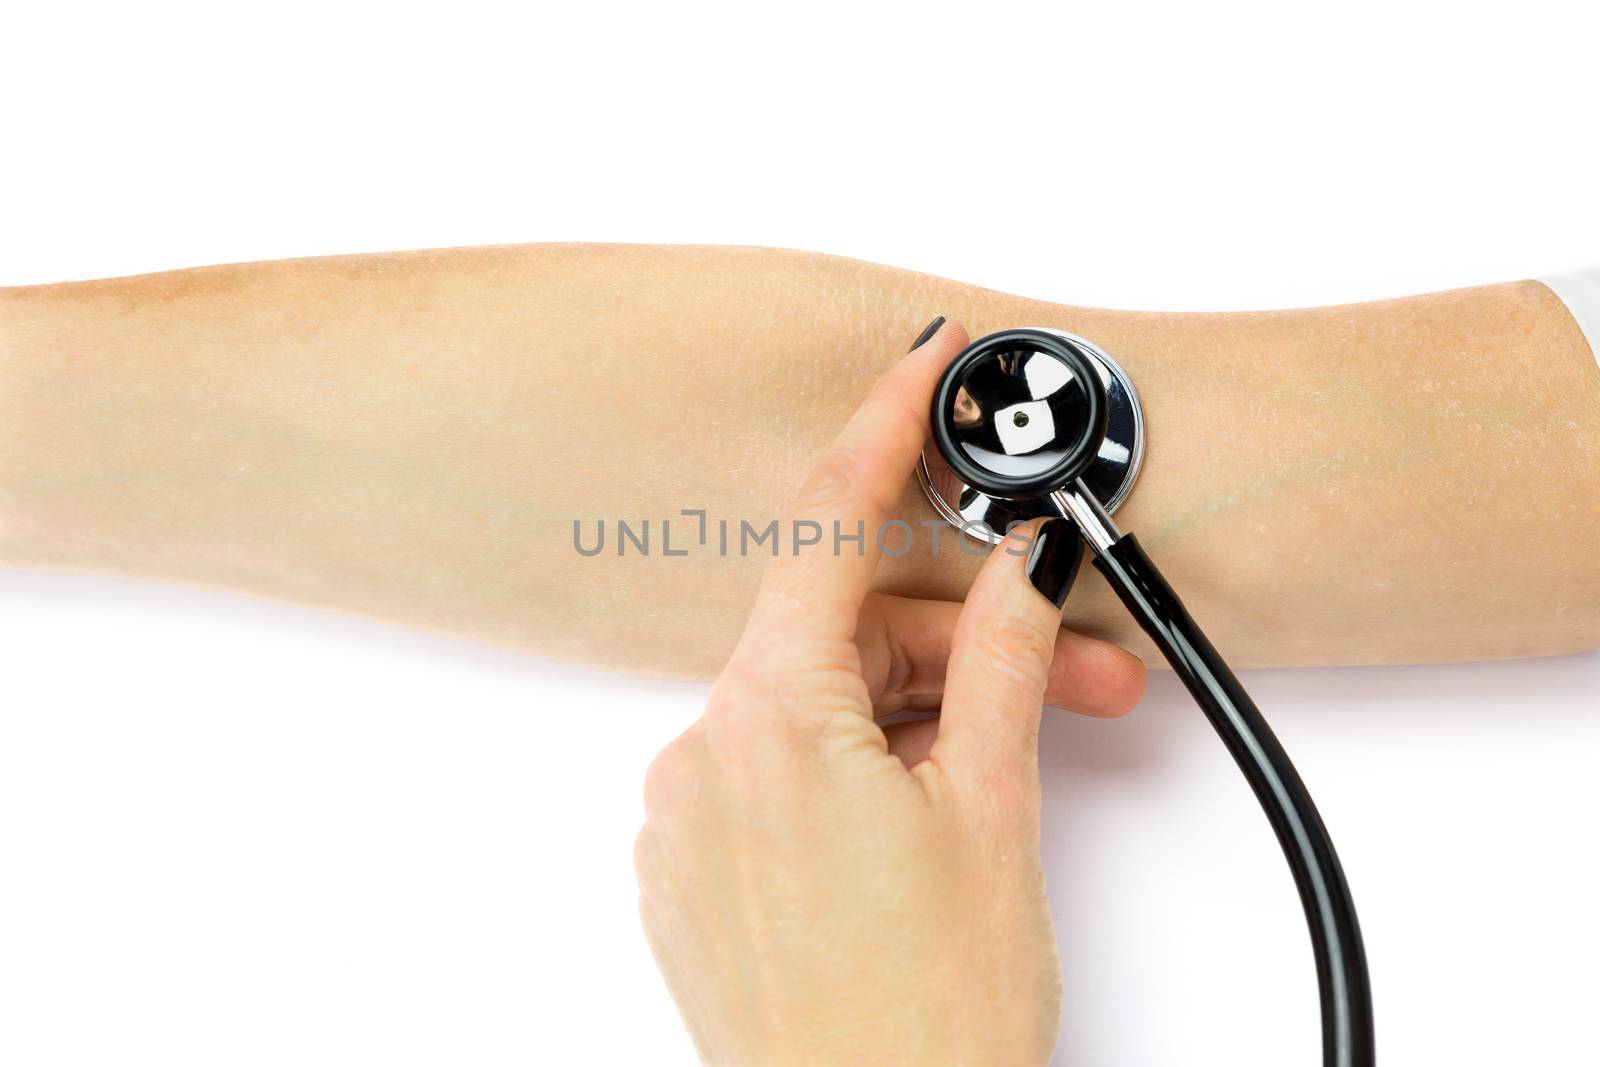 Female hand holding stethoscope on arm of patient by BenSchonewille